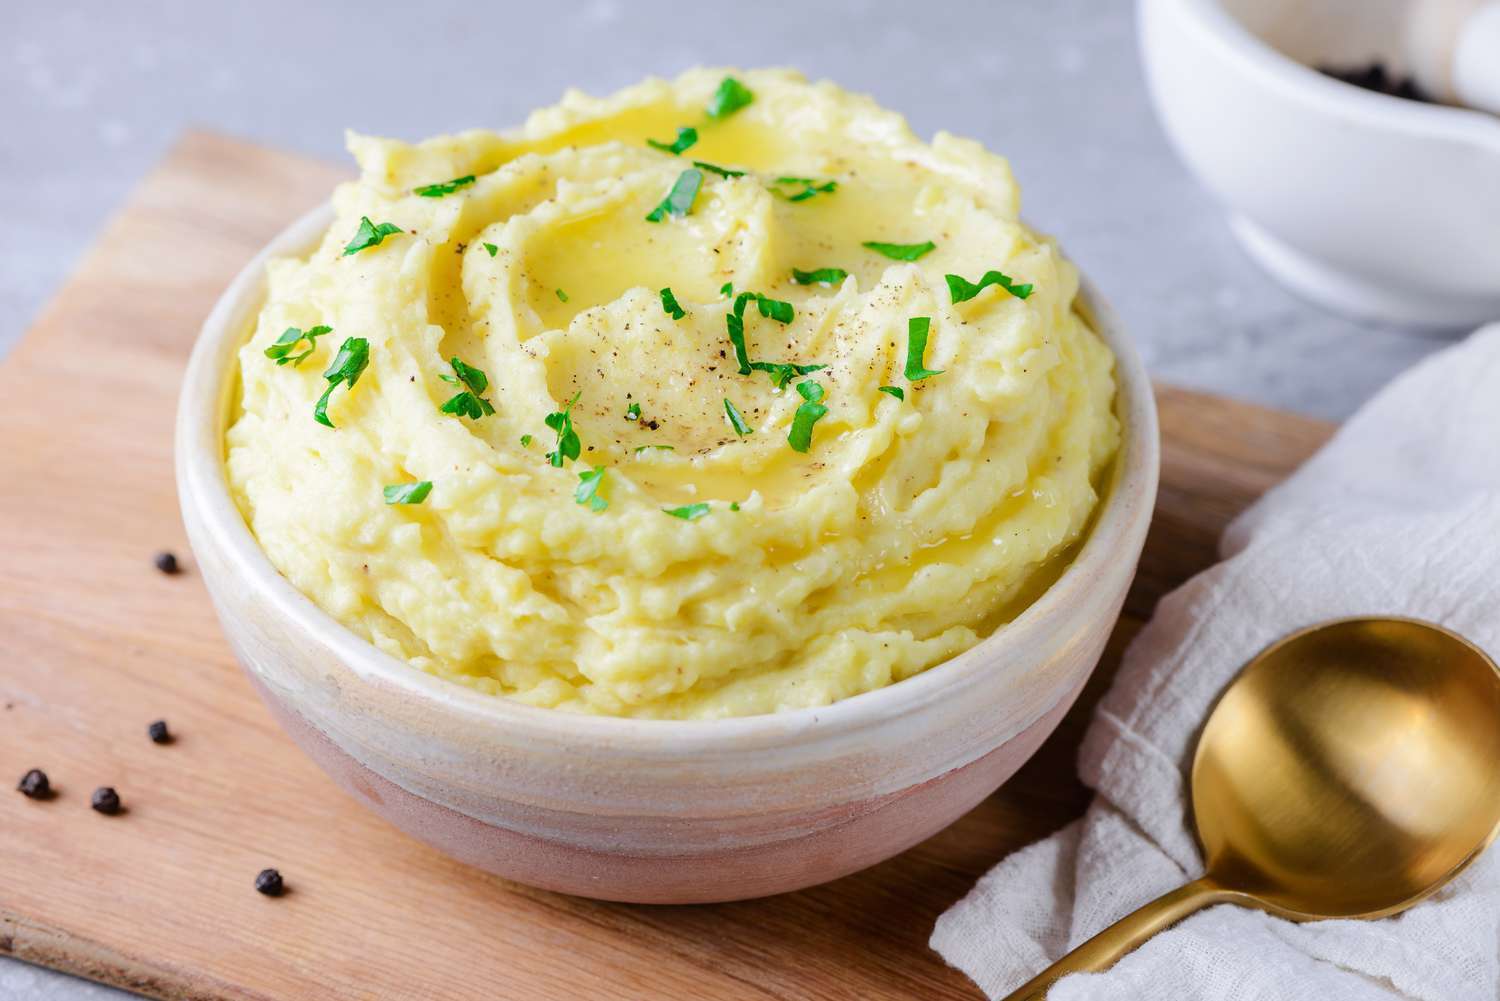 Mashed potatoes for the dish